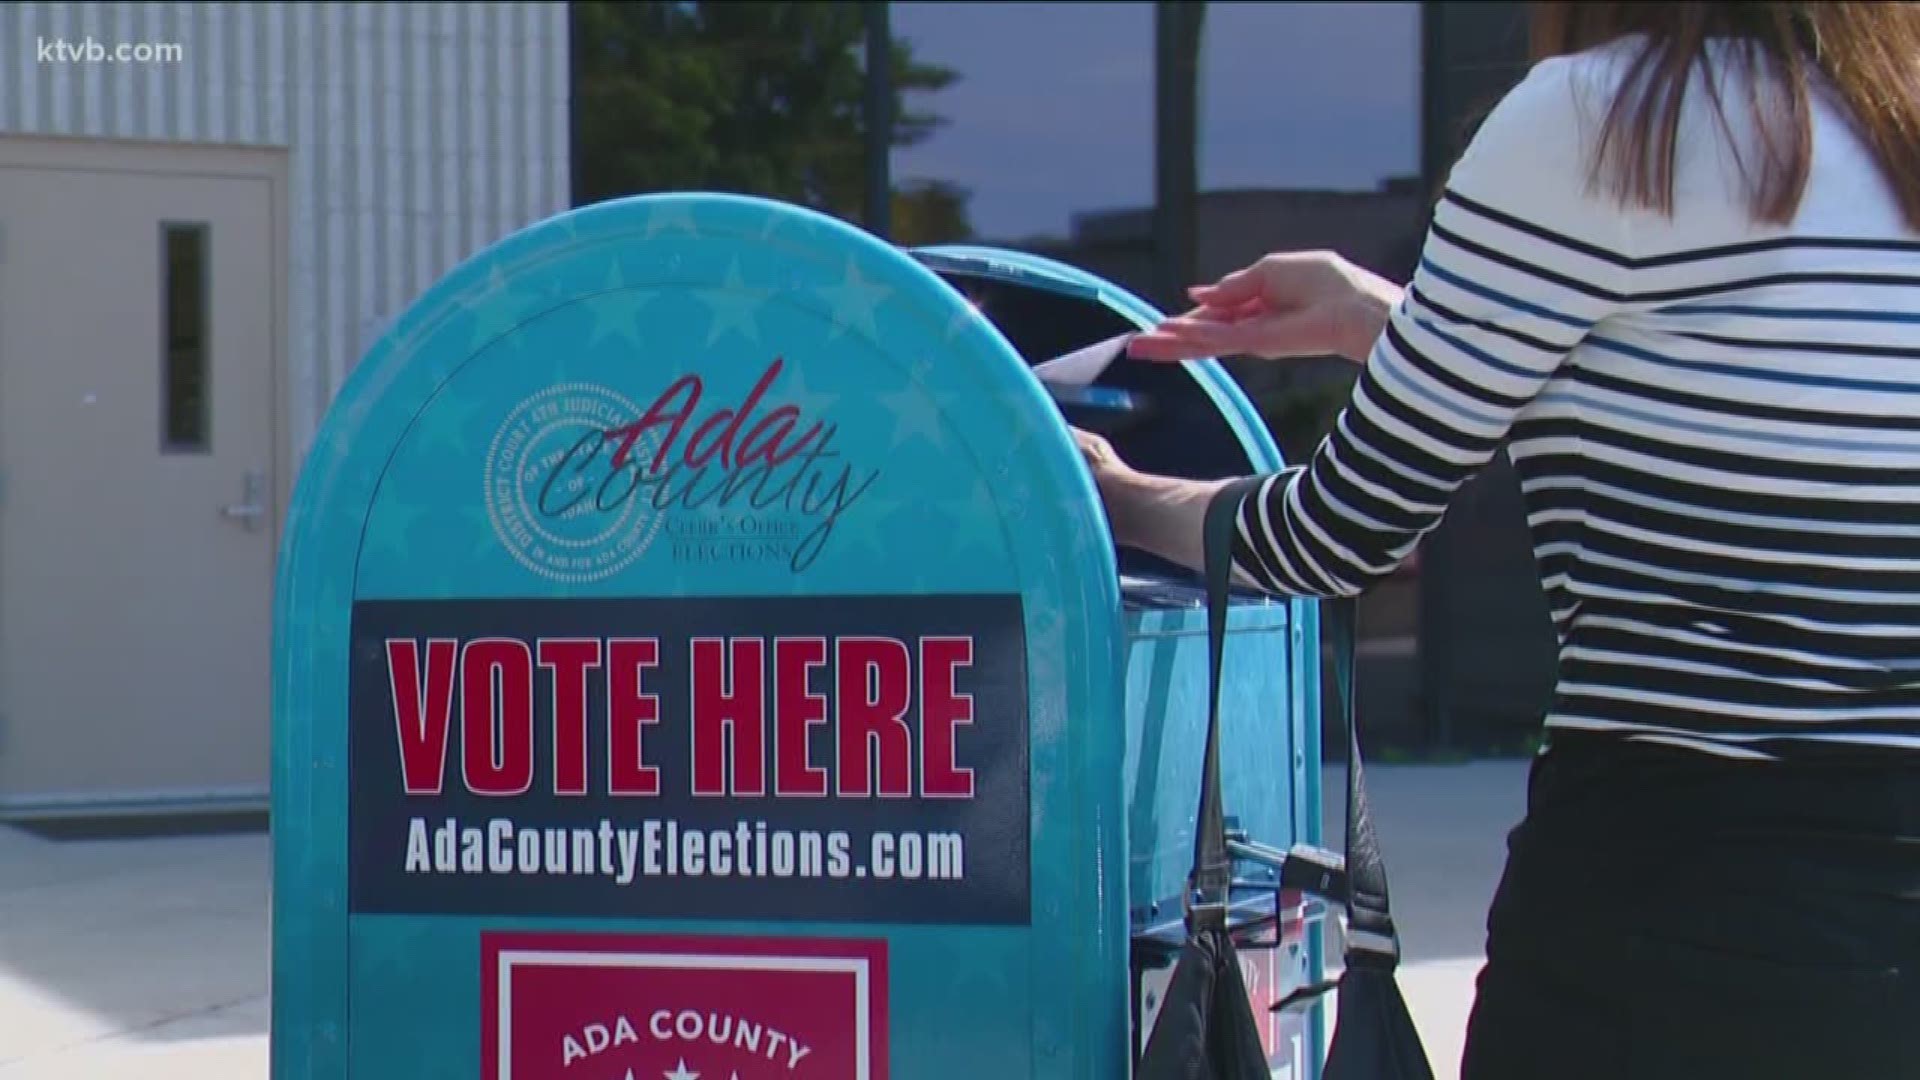 So does this mean Idaho will move to all mail-in voting in the future? We asked some top Idaho election officials.